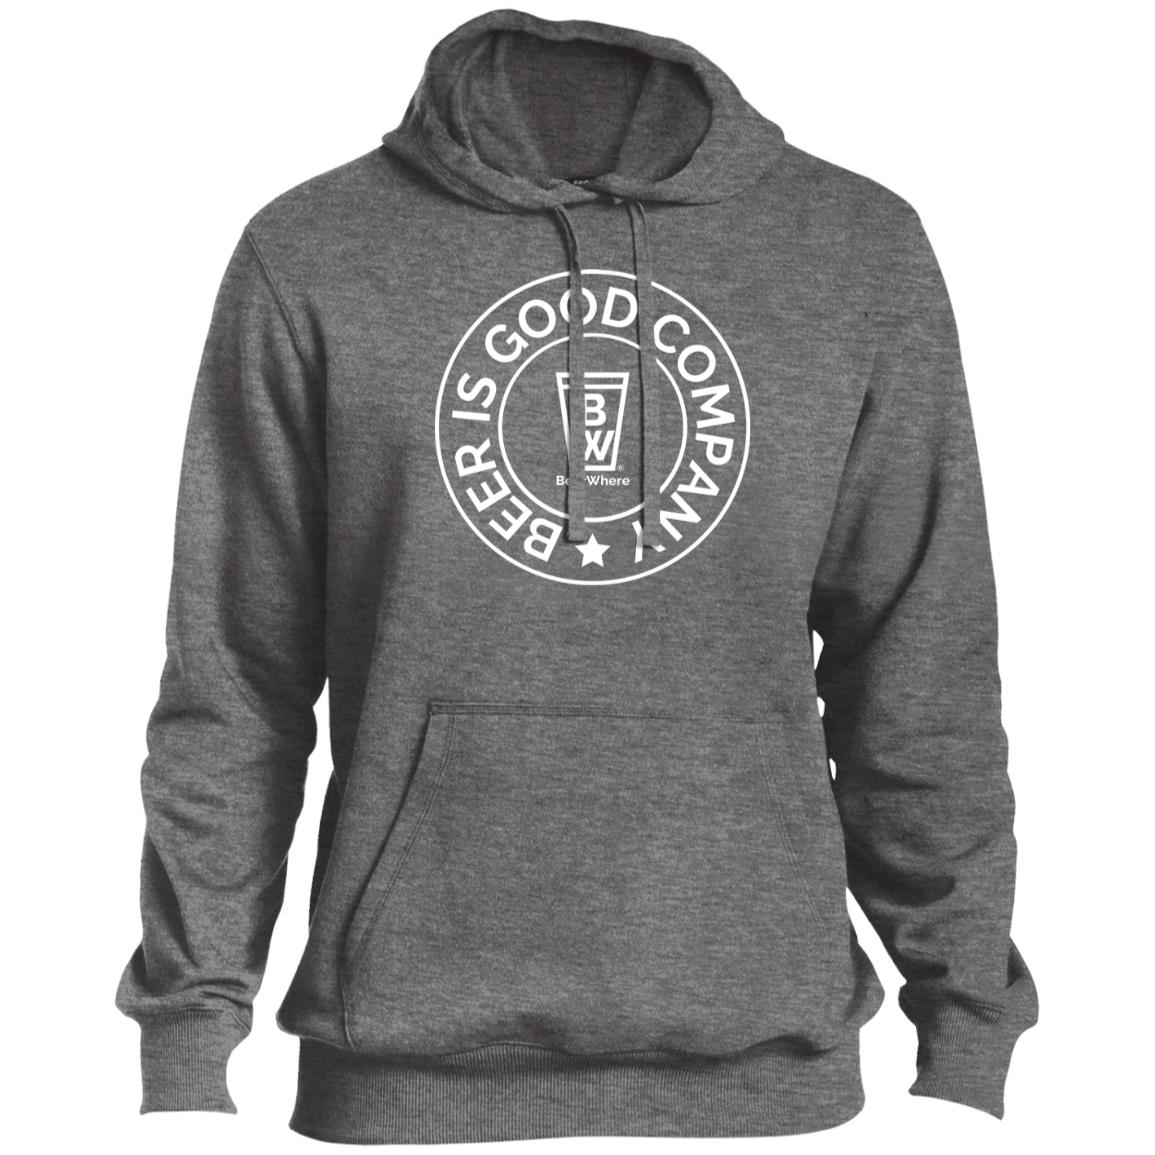 Good Company Pullover Hoodie